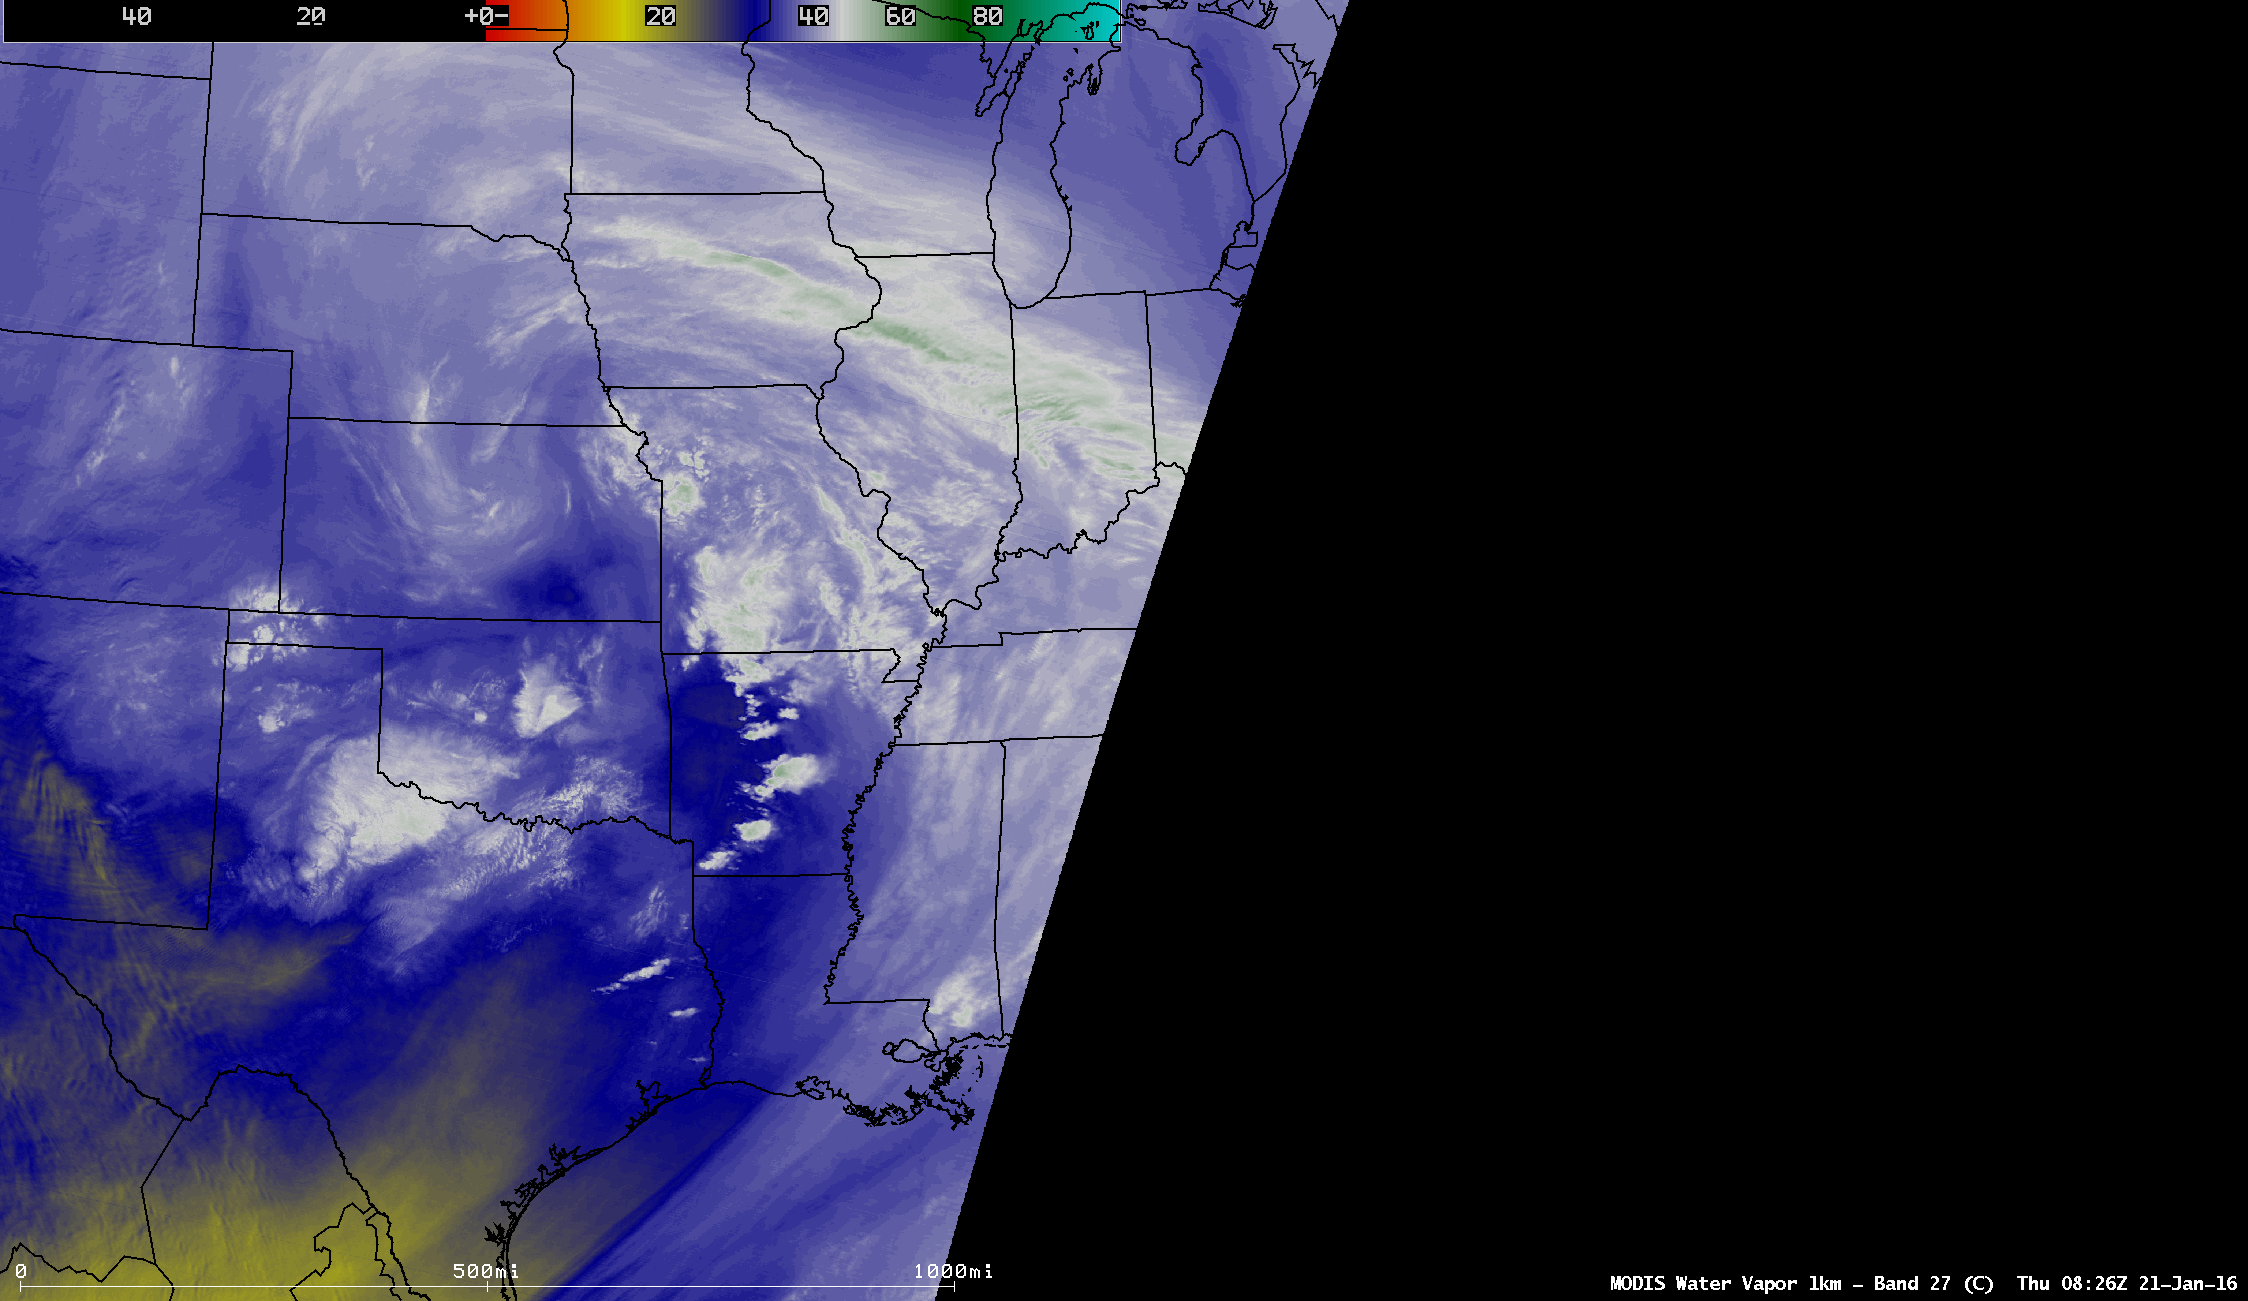 MODIS Water Vapor (6.7 µm) images [click to enlarge]